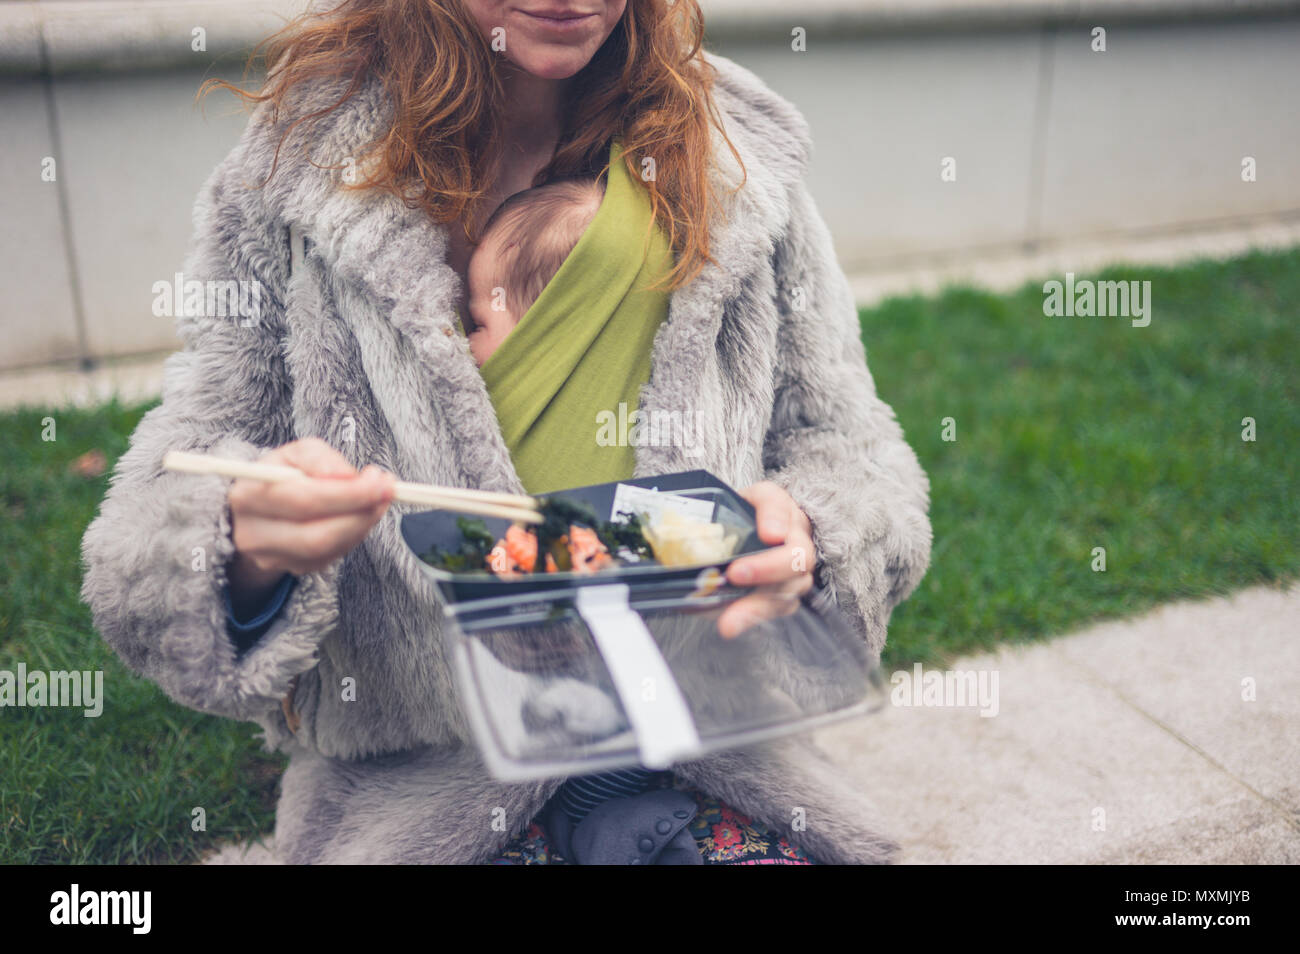 A young mother with a baby in a carrier sling is eating sushi outside Stock Photo